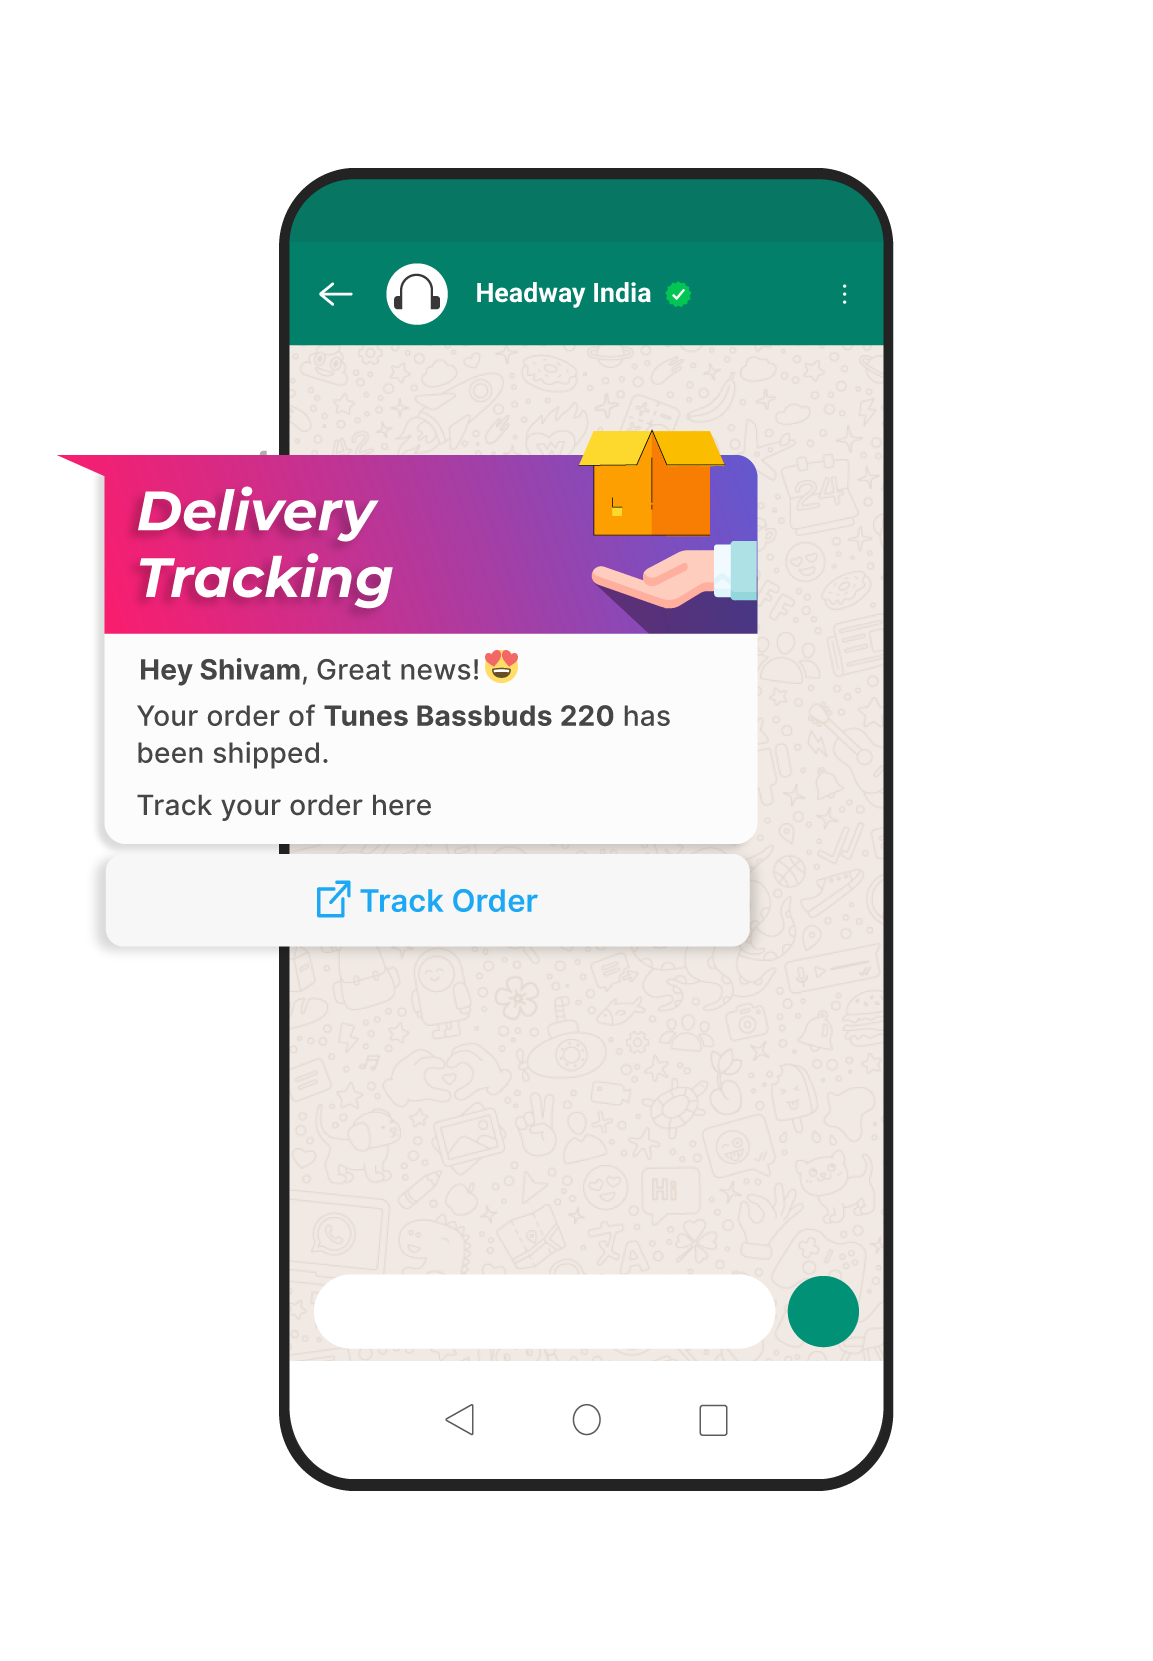 Delivery tracking